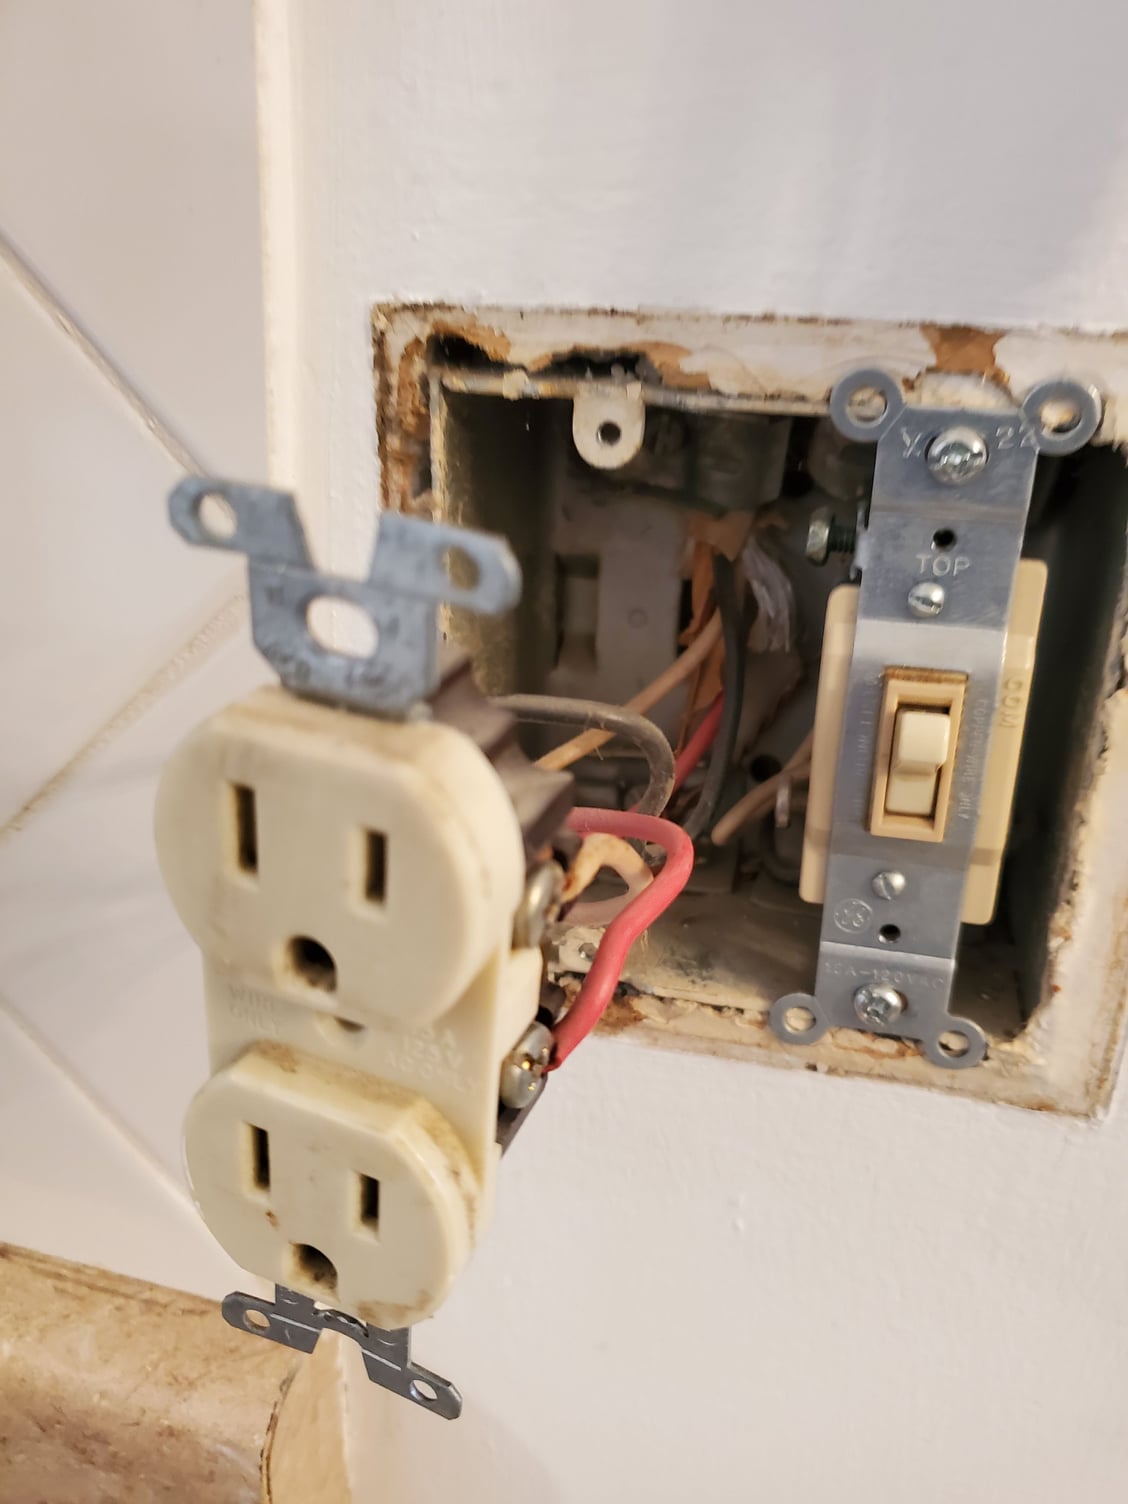 open neutral outlet problems